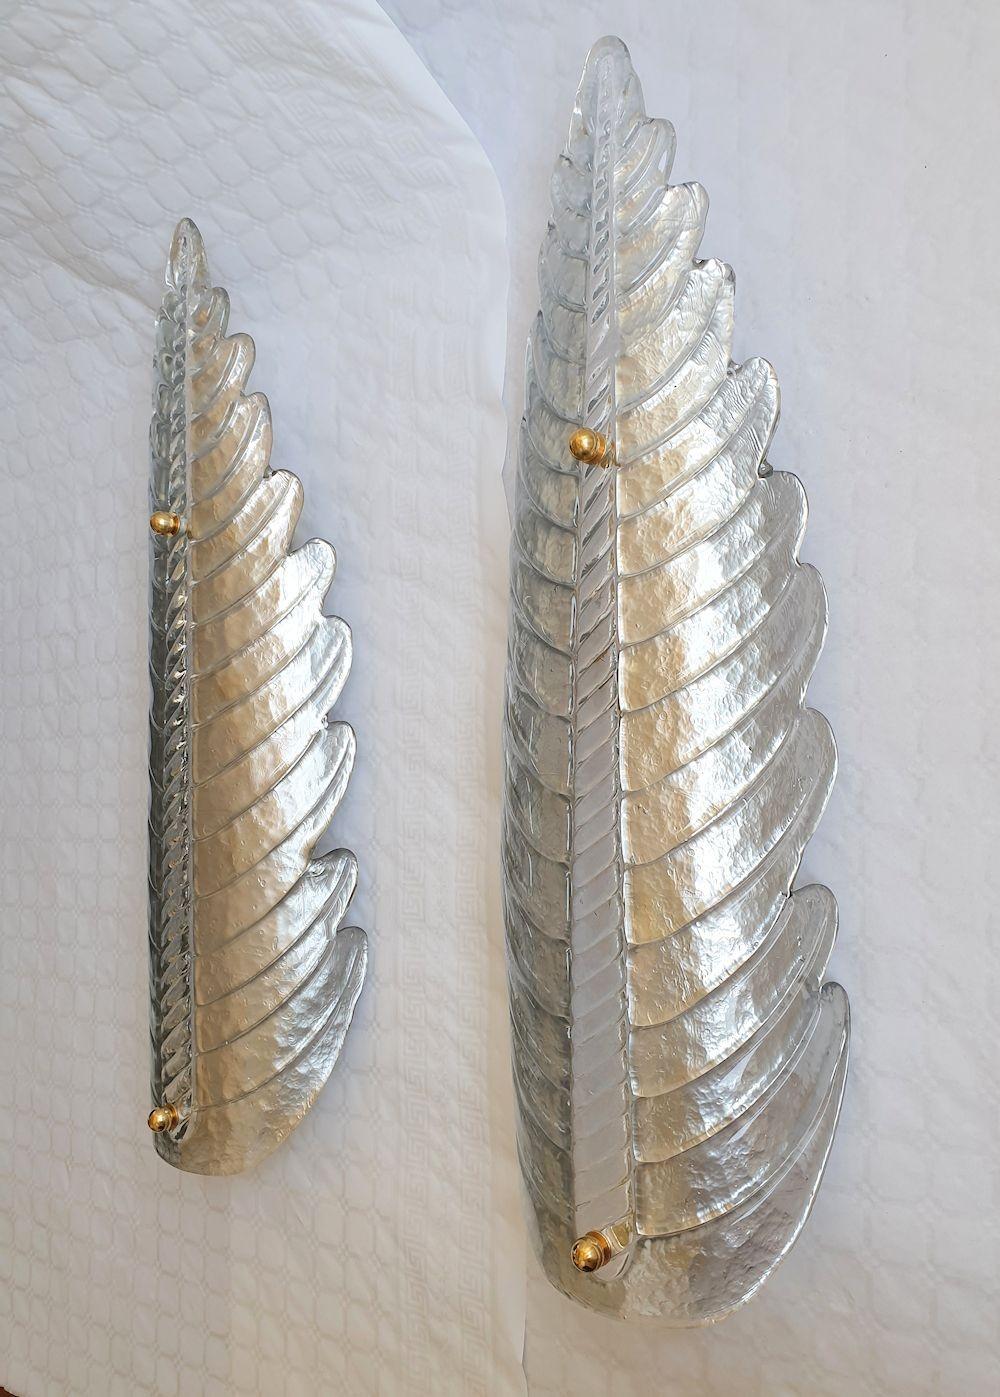 Very large pair of vintage silver Murano glass wall sconces, attributed to Barovier & Toso, Italy 1970s.
The Mid Century Modern leaf shaped sconces are made of a single handmade Murano glass, in a silver color, with a transparent center rod and